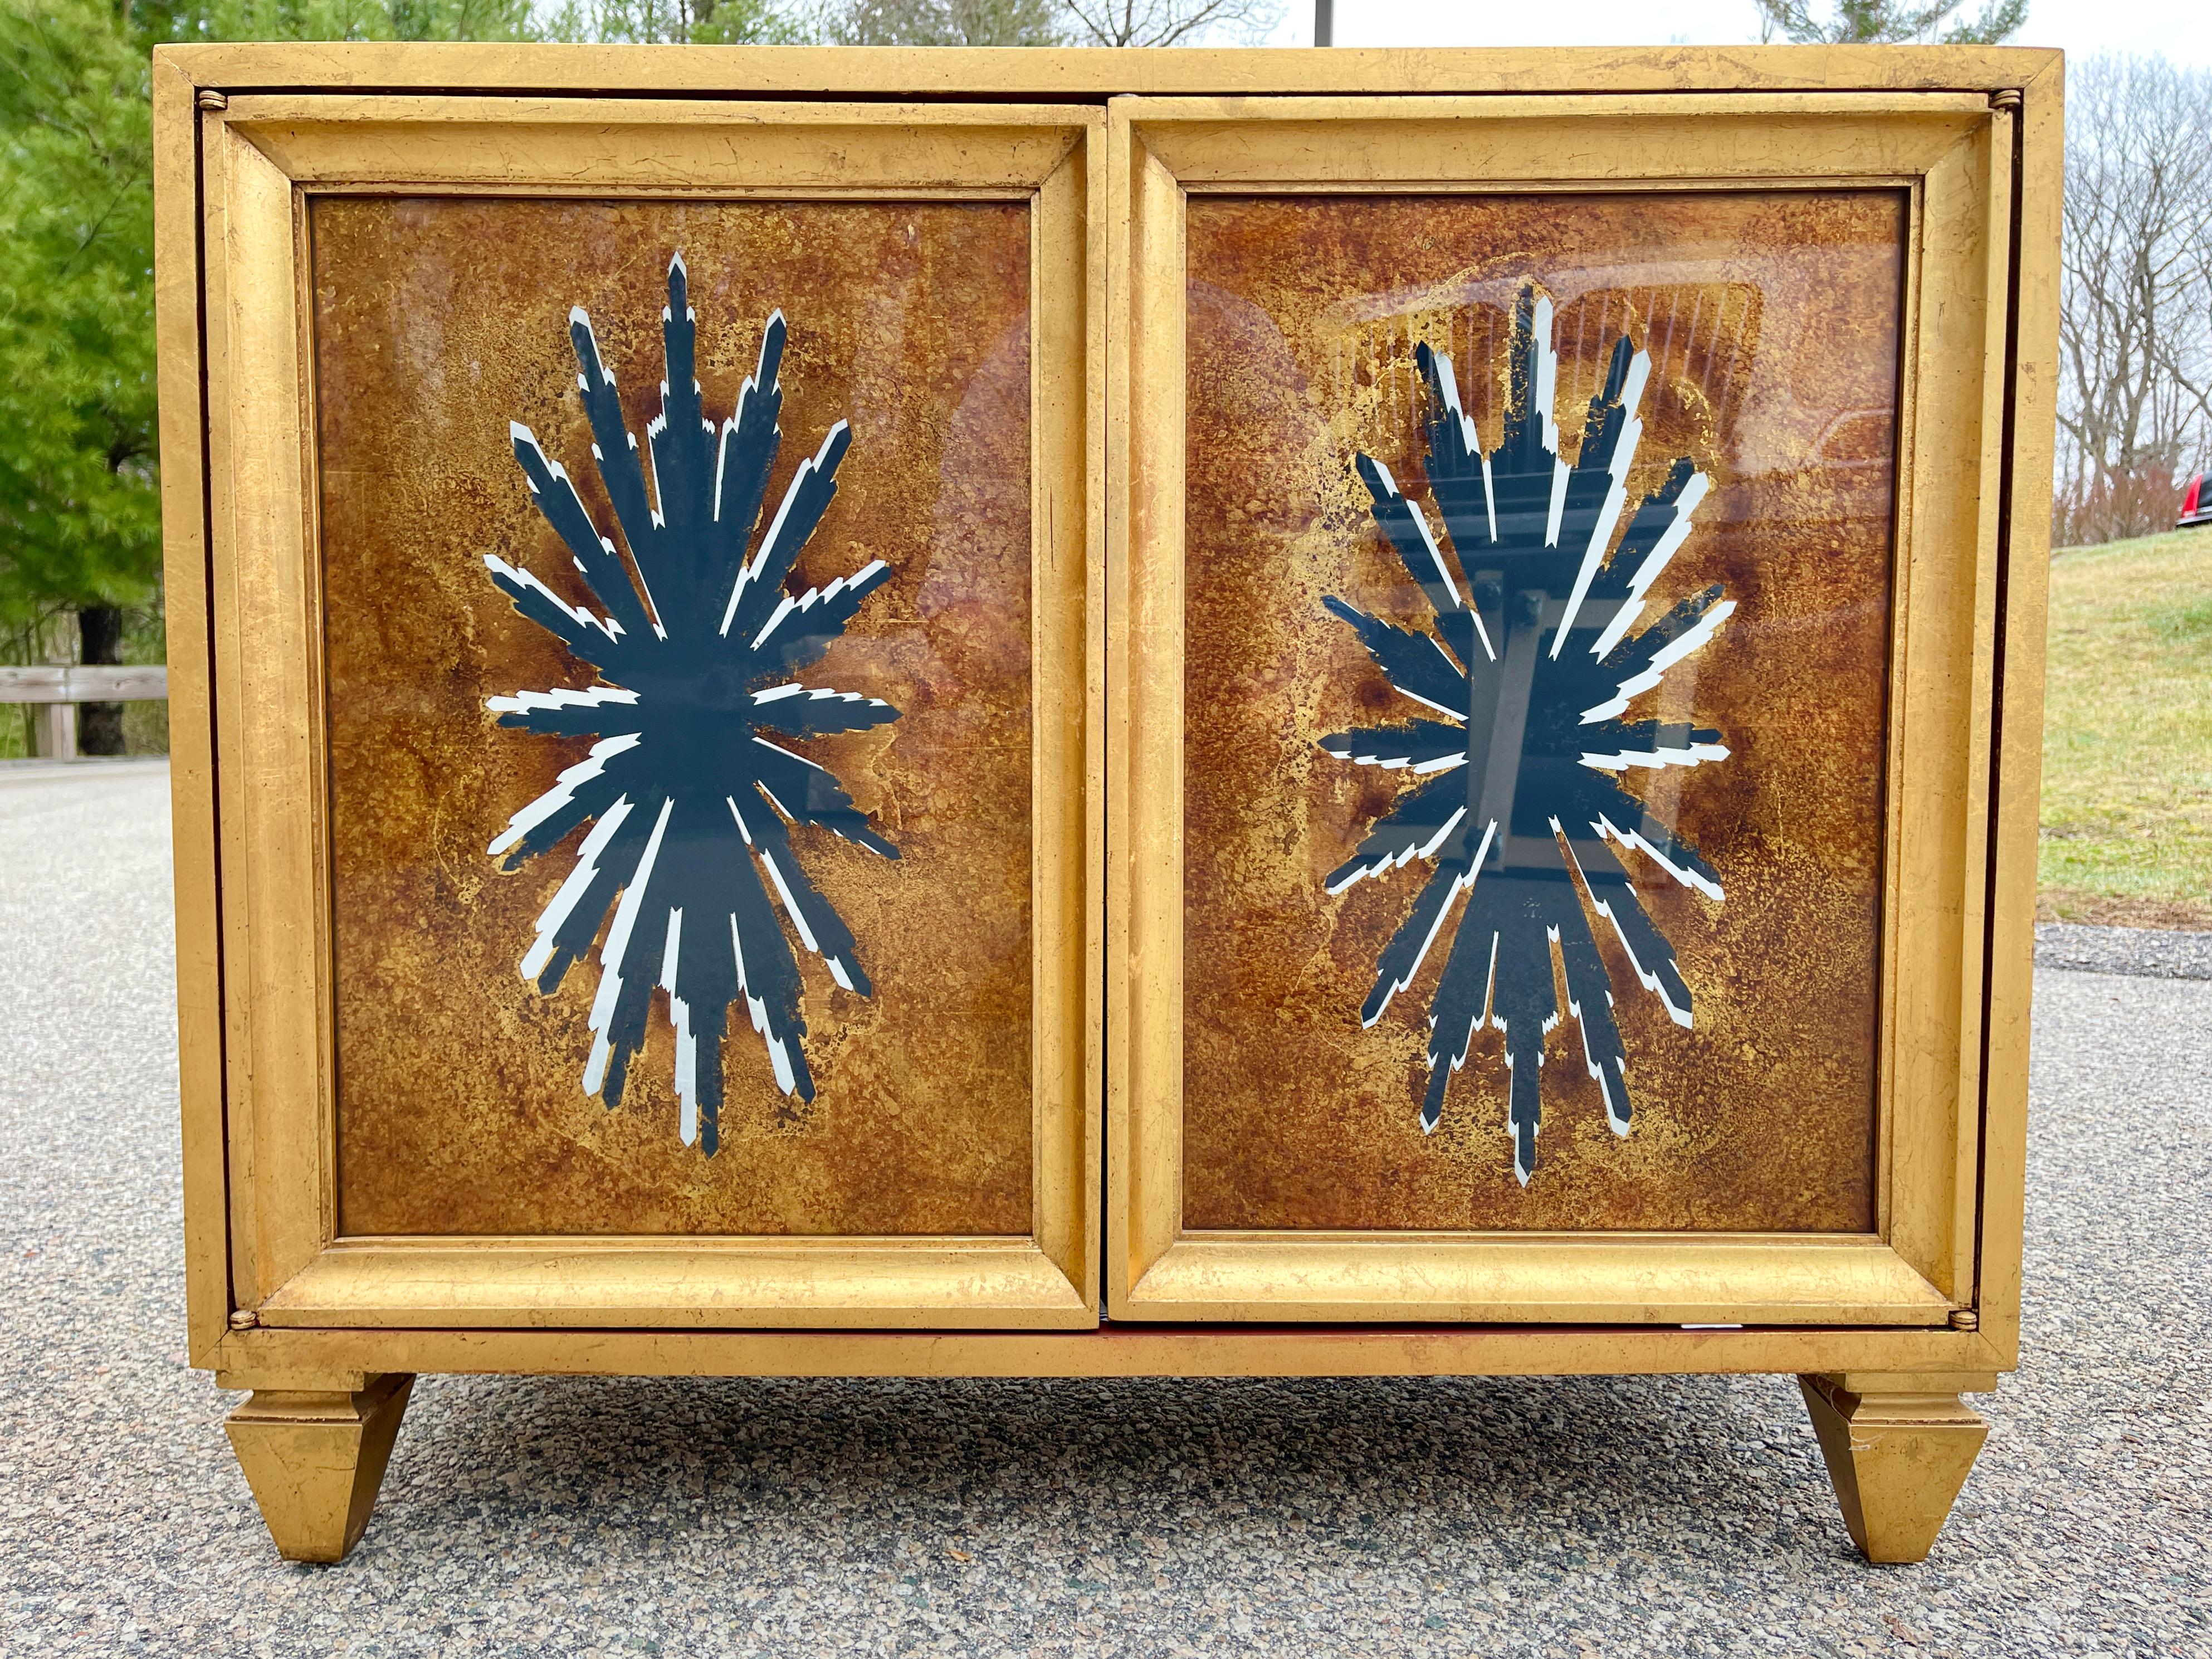 Amazing and rare pair of vintage early 1960's cabinets from from an outrageously over-the-top period Hollywood Regency decorated home outside of Boston; think Zsa Zsa on steroids.
Each cabinet is covered in gold leaf, has double doors with Tony